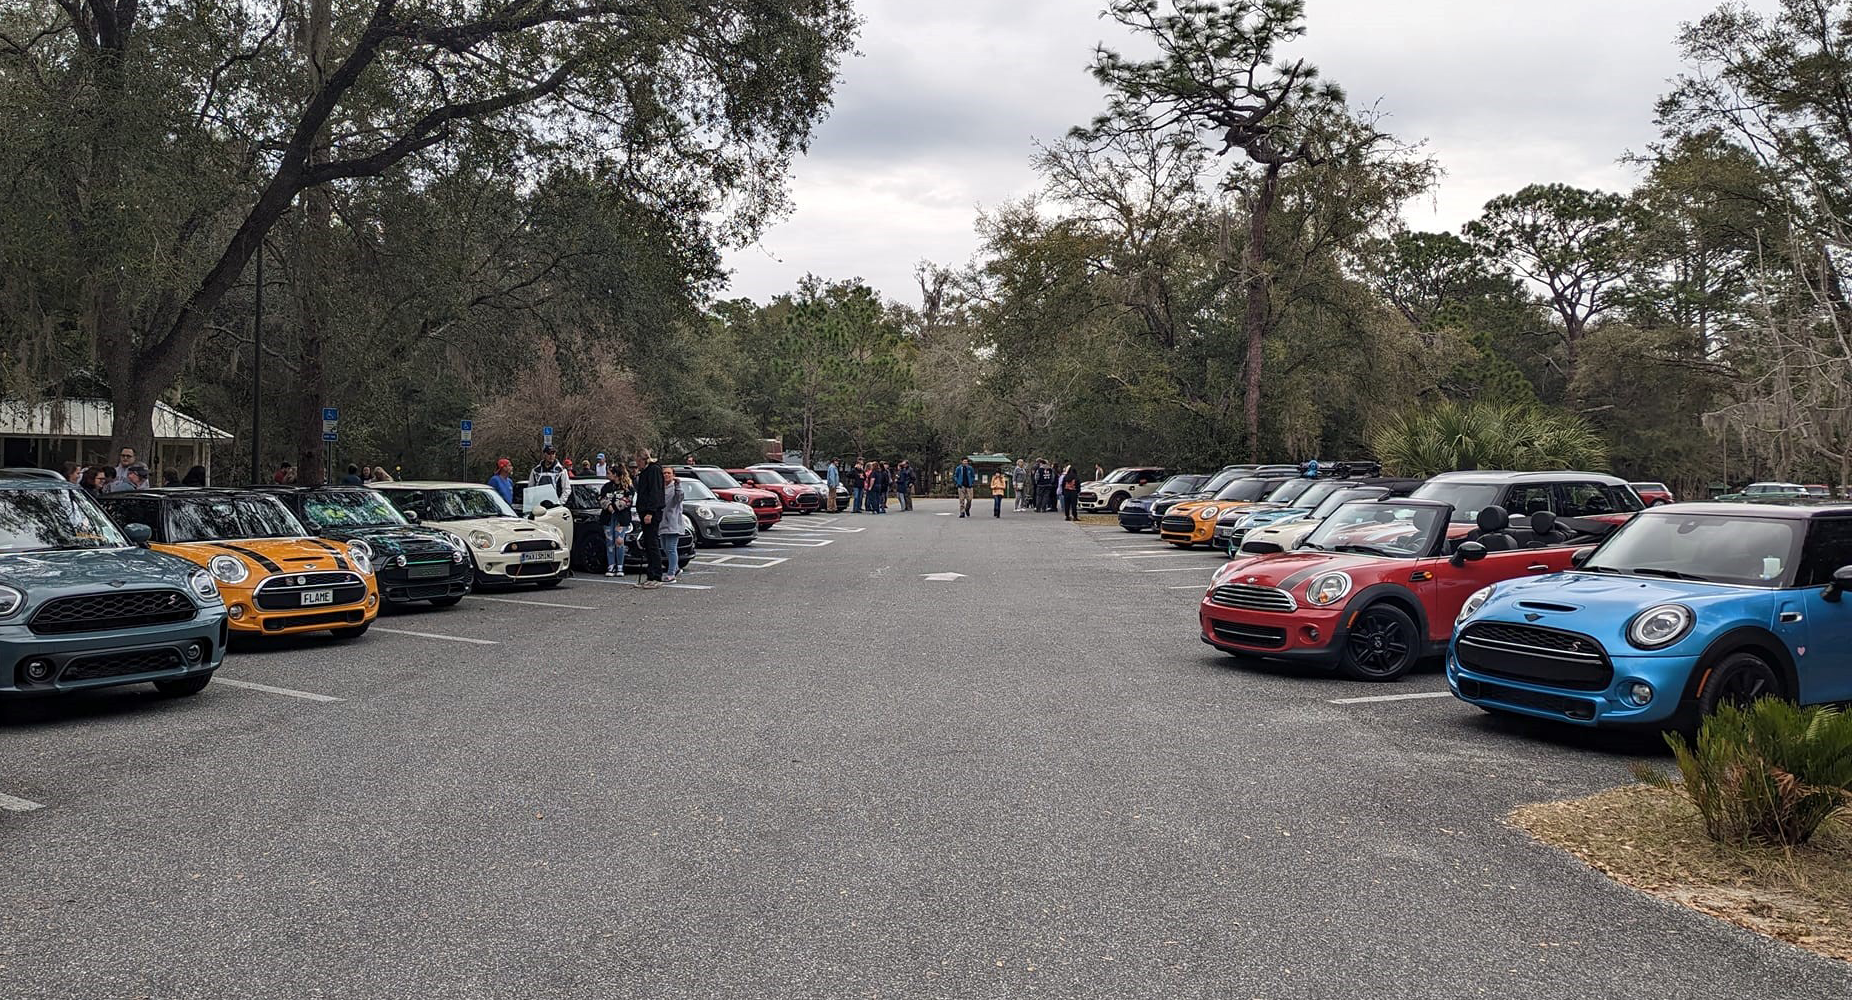 Line Up of MINIs at Sunshine MINI Owners Group Picnic Event